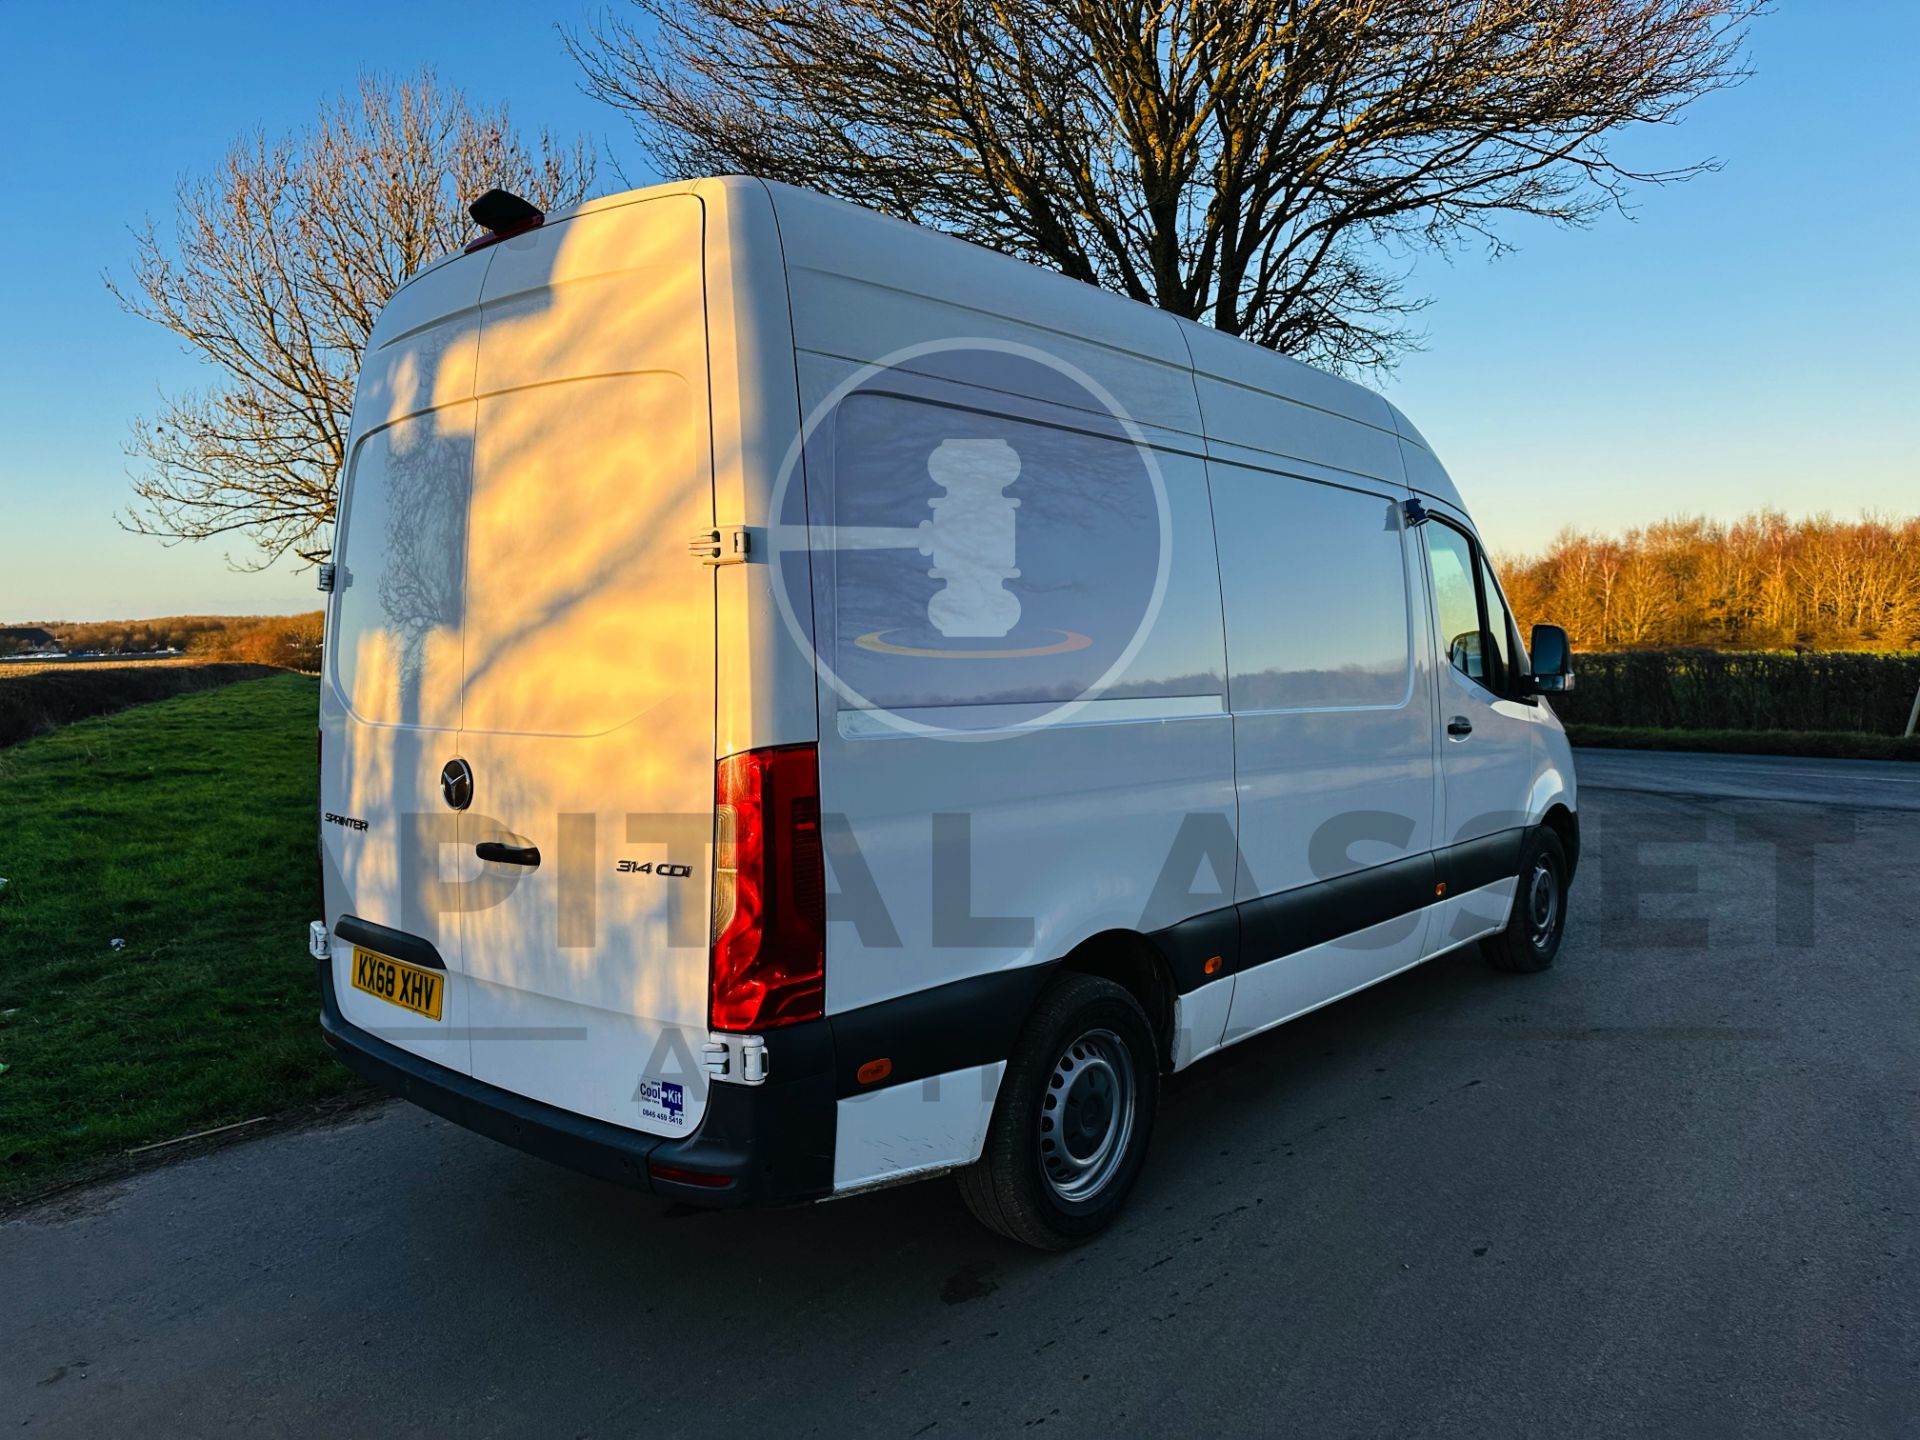 MERCEDES-BENZ SPRINTER 314 CDI *MWB - REFRIGERATED VAN* (2019 - FACELIFT MODEL) *OVERNIGHT STANDBY* - Image 9 of 32